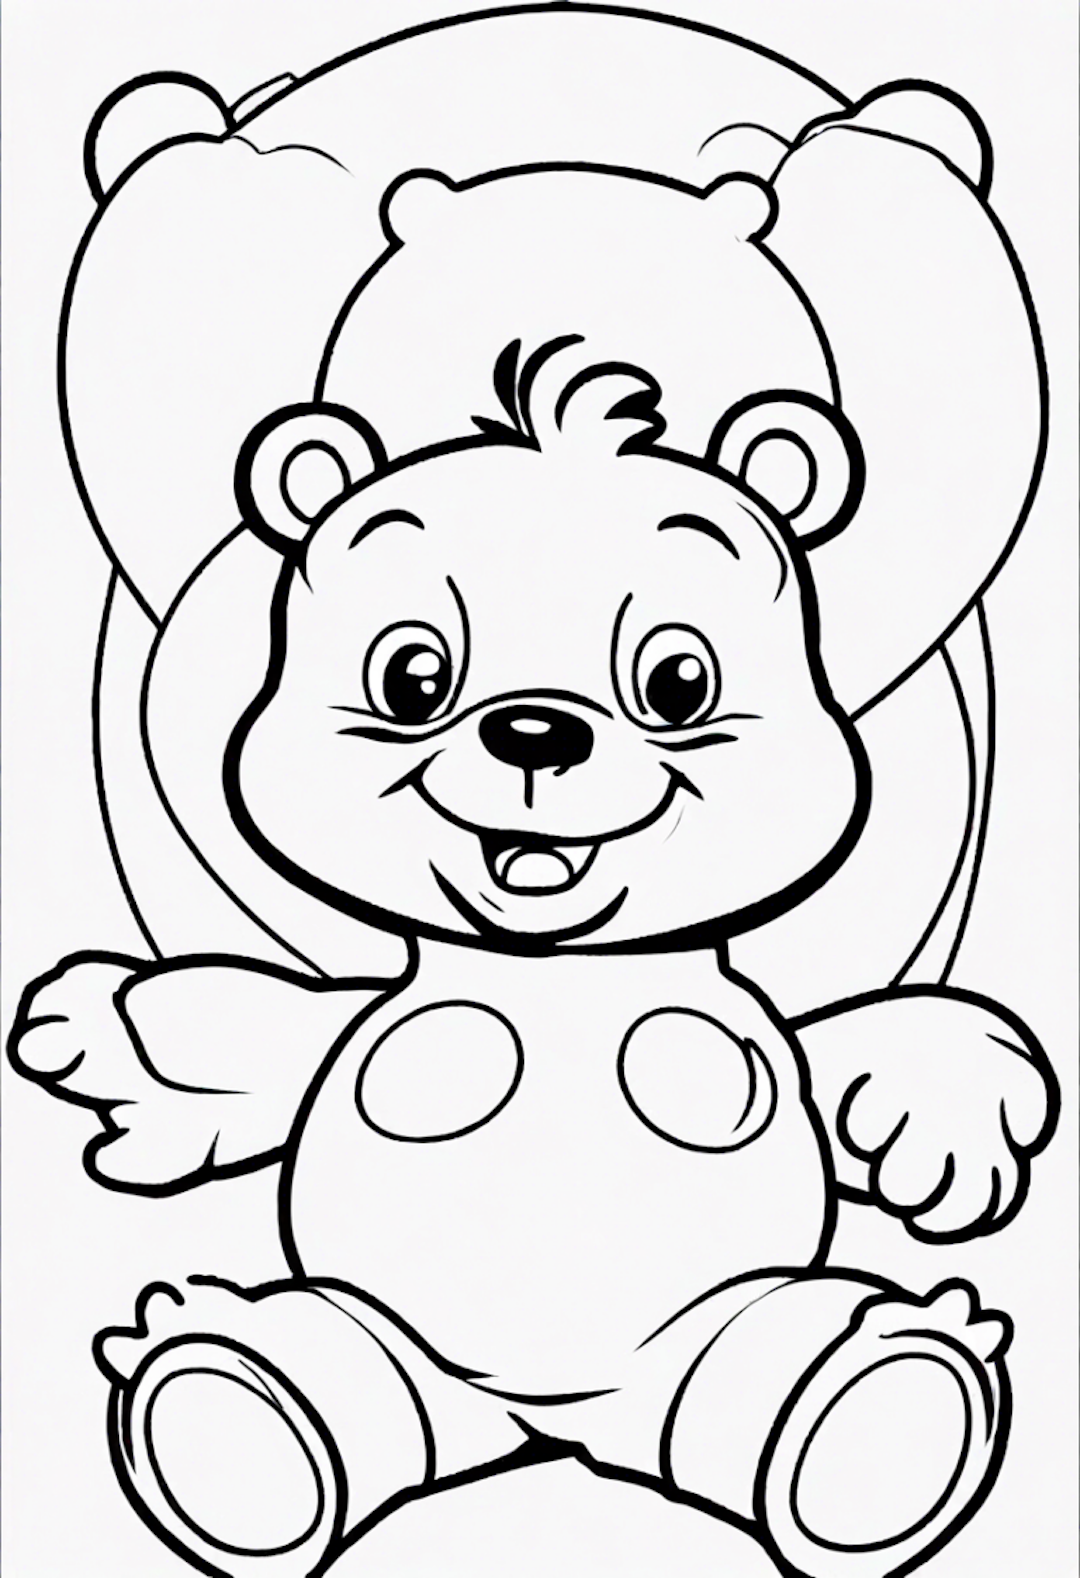 Care Bear coloring pages